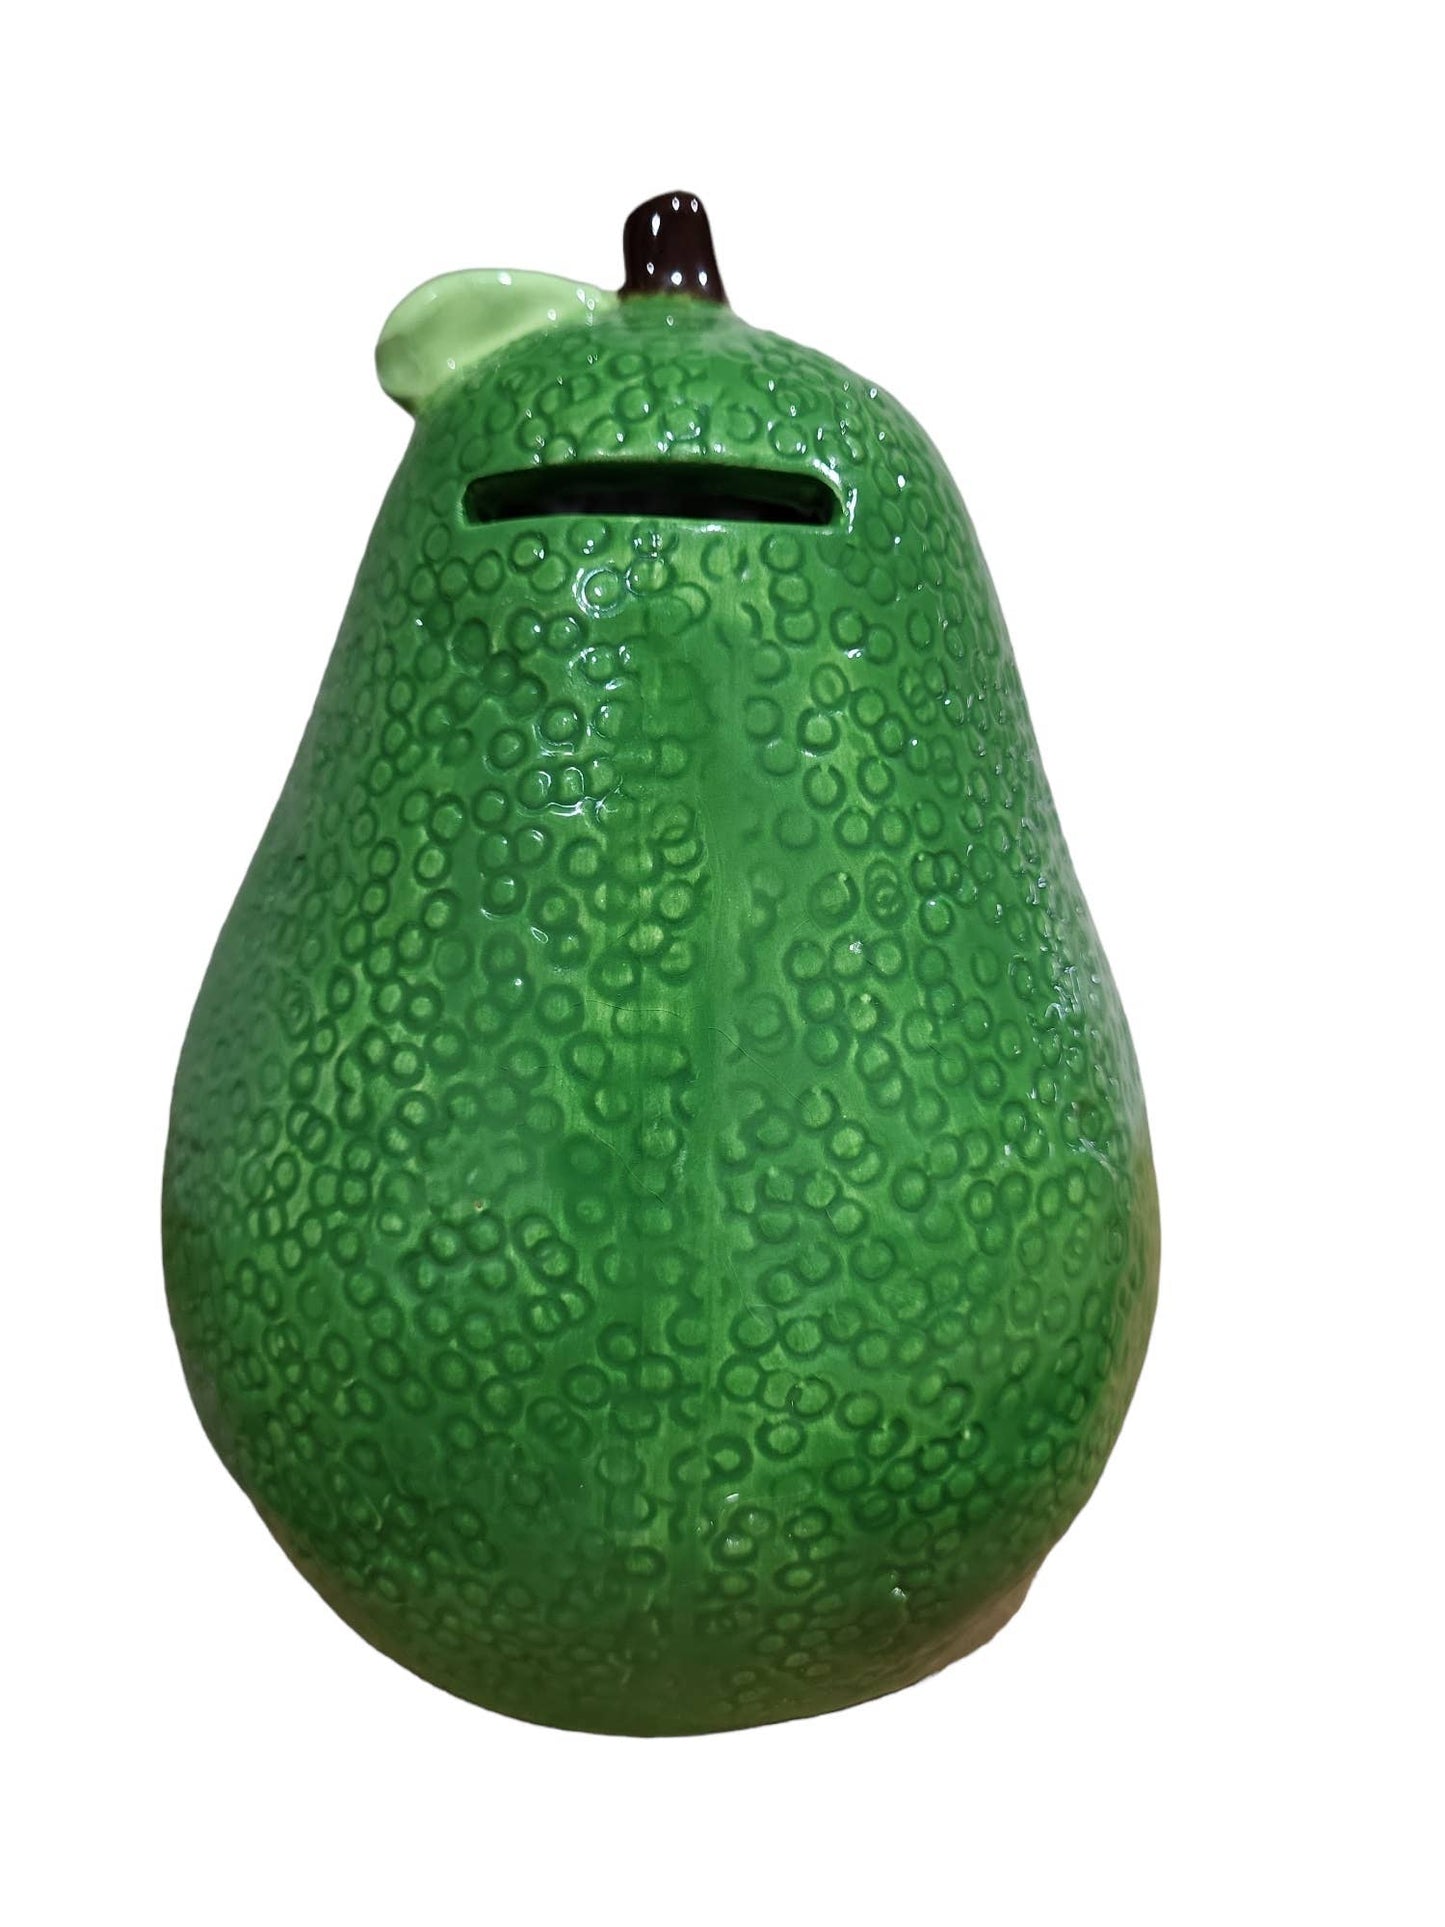 Large 6.75" Avocado Ceramic Coin Bank with Fur